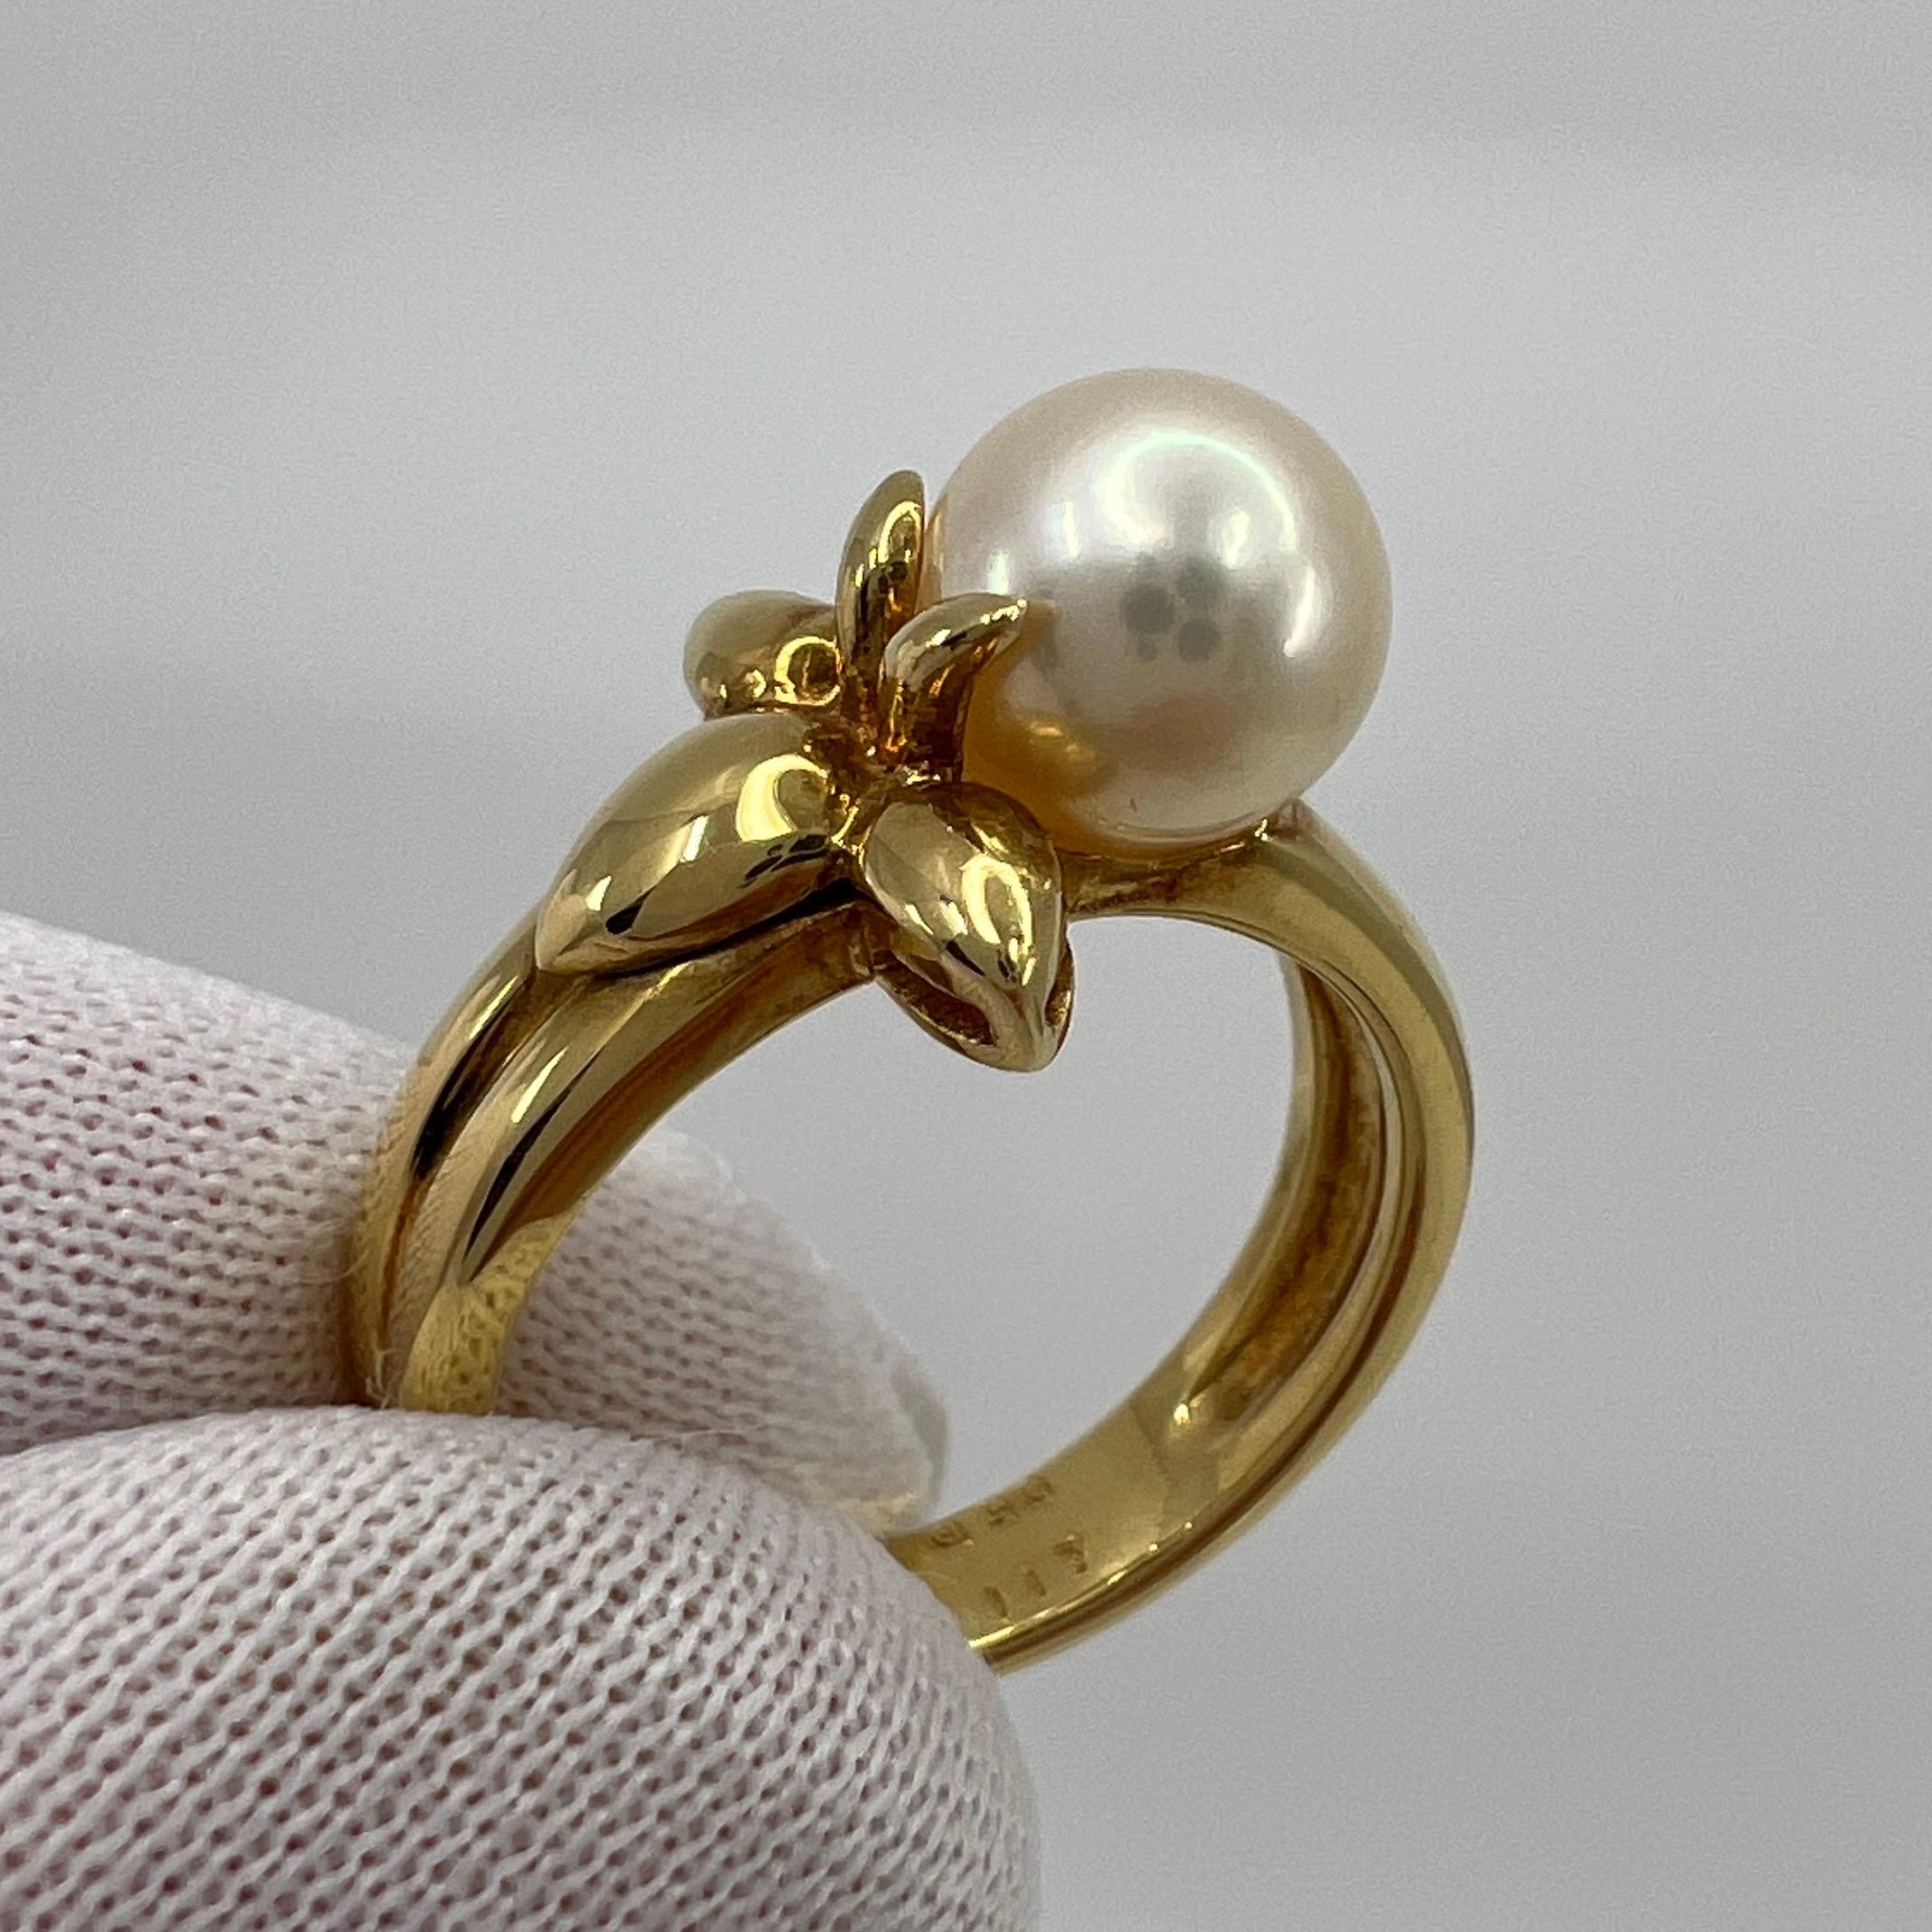 Rare Vintage Van Cleef & Arpels Pearl 18k Yellow Gold Flower Ring with Box For Sale 1